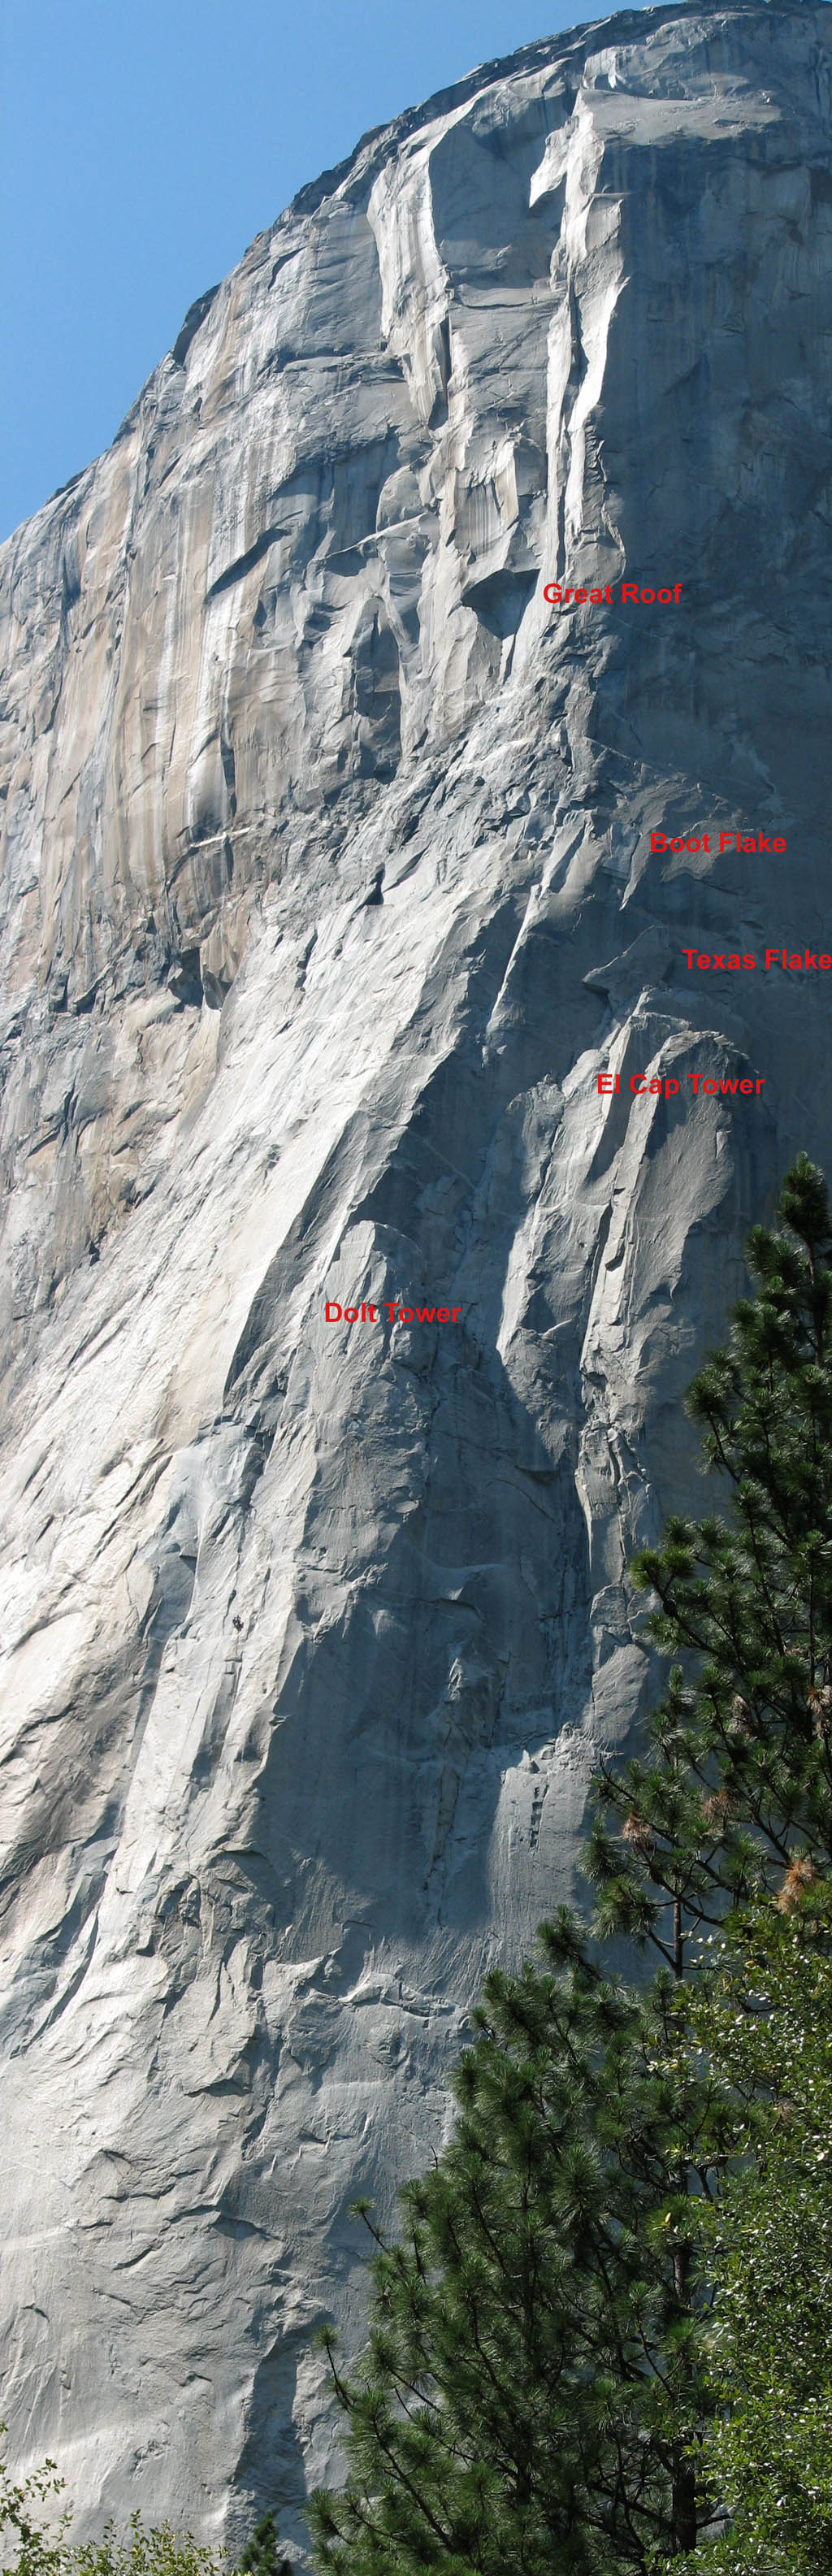 Panorama of The Nose of El Capitan.  I annotated some landmarks on the route. (Category:  Rock Climbing)